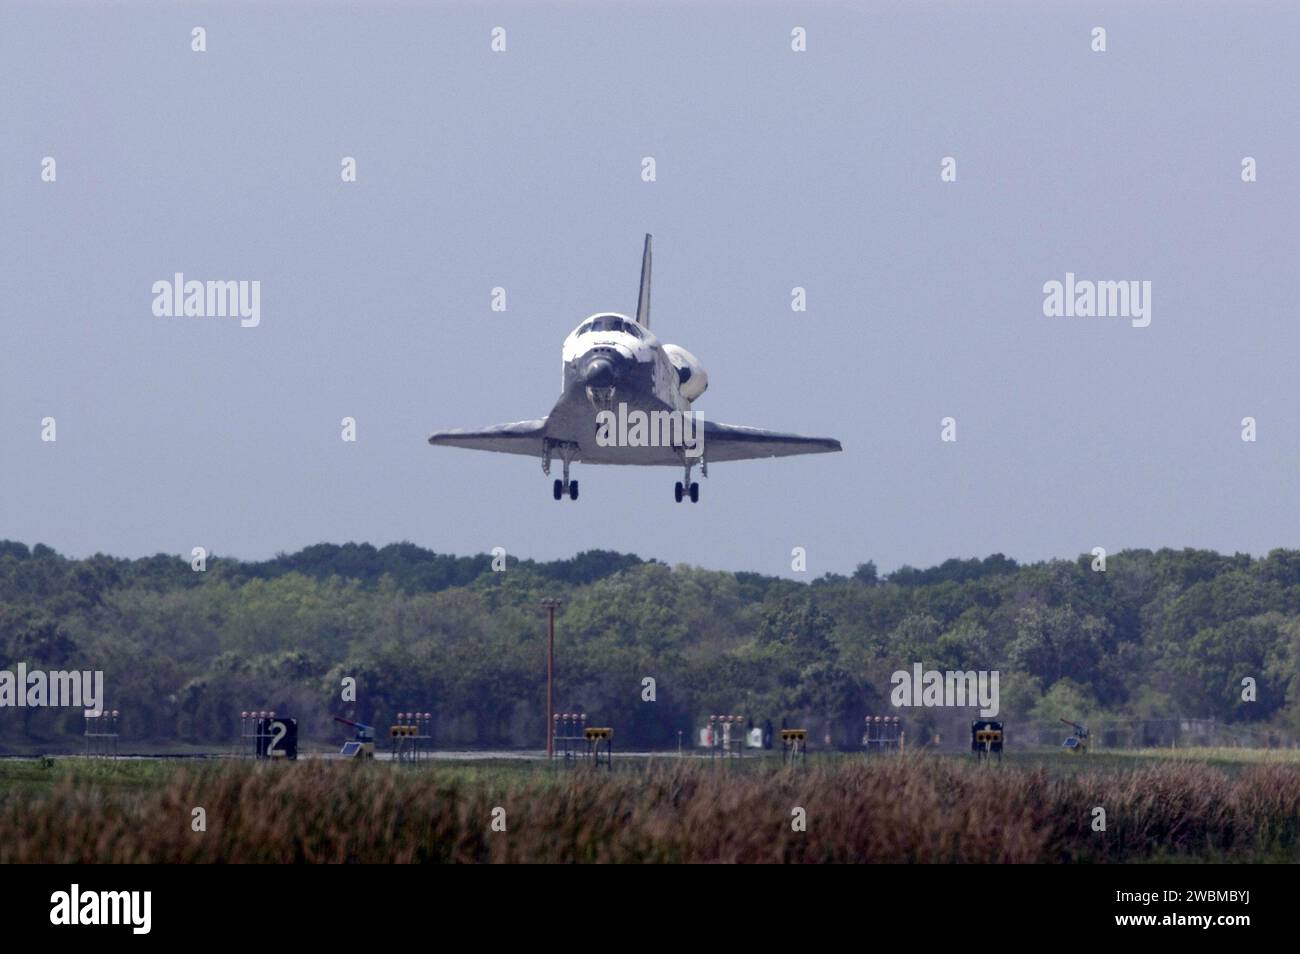 CAPE CANAVERAL, Fla. – Space shuttle Discovery approaches Runway 15 at NASA's Kennedy Space Center in Florida to complete the 13-day, 5.3-million mile journey on the STS-119 mission to the International Space Station. Main gear touchdown was at 3:13:17 p.m. EDT.  Nose gear touchdown was at 3:13:40 p.m. and wheels stop was at 3:14:45 p.m.  Discovery delivered the final pair of large power-generating solar array wings and the S6 truss segment. The mission was the 28th flight to the station, the 36th flight of Discovery and the 125th in the Space Shuttle Program, as well as the 70th landing at Ke Stock Photo